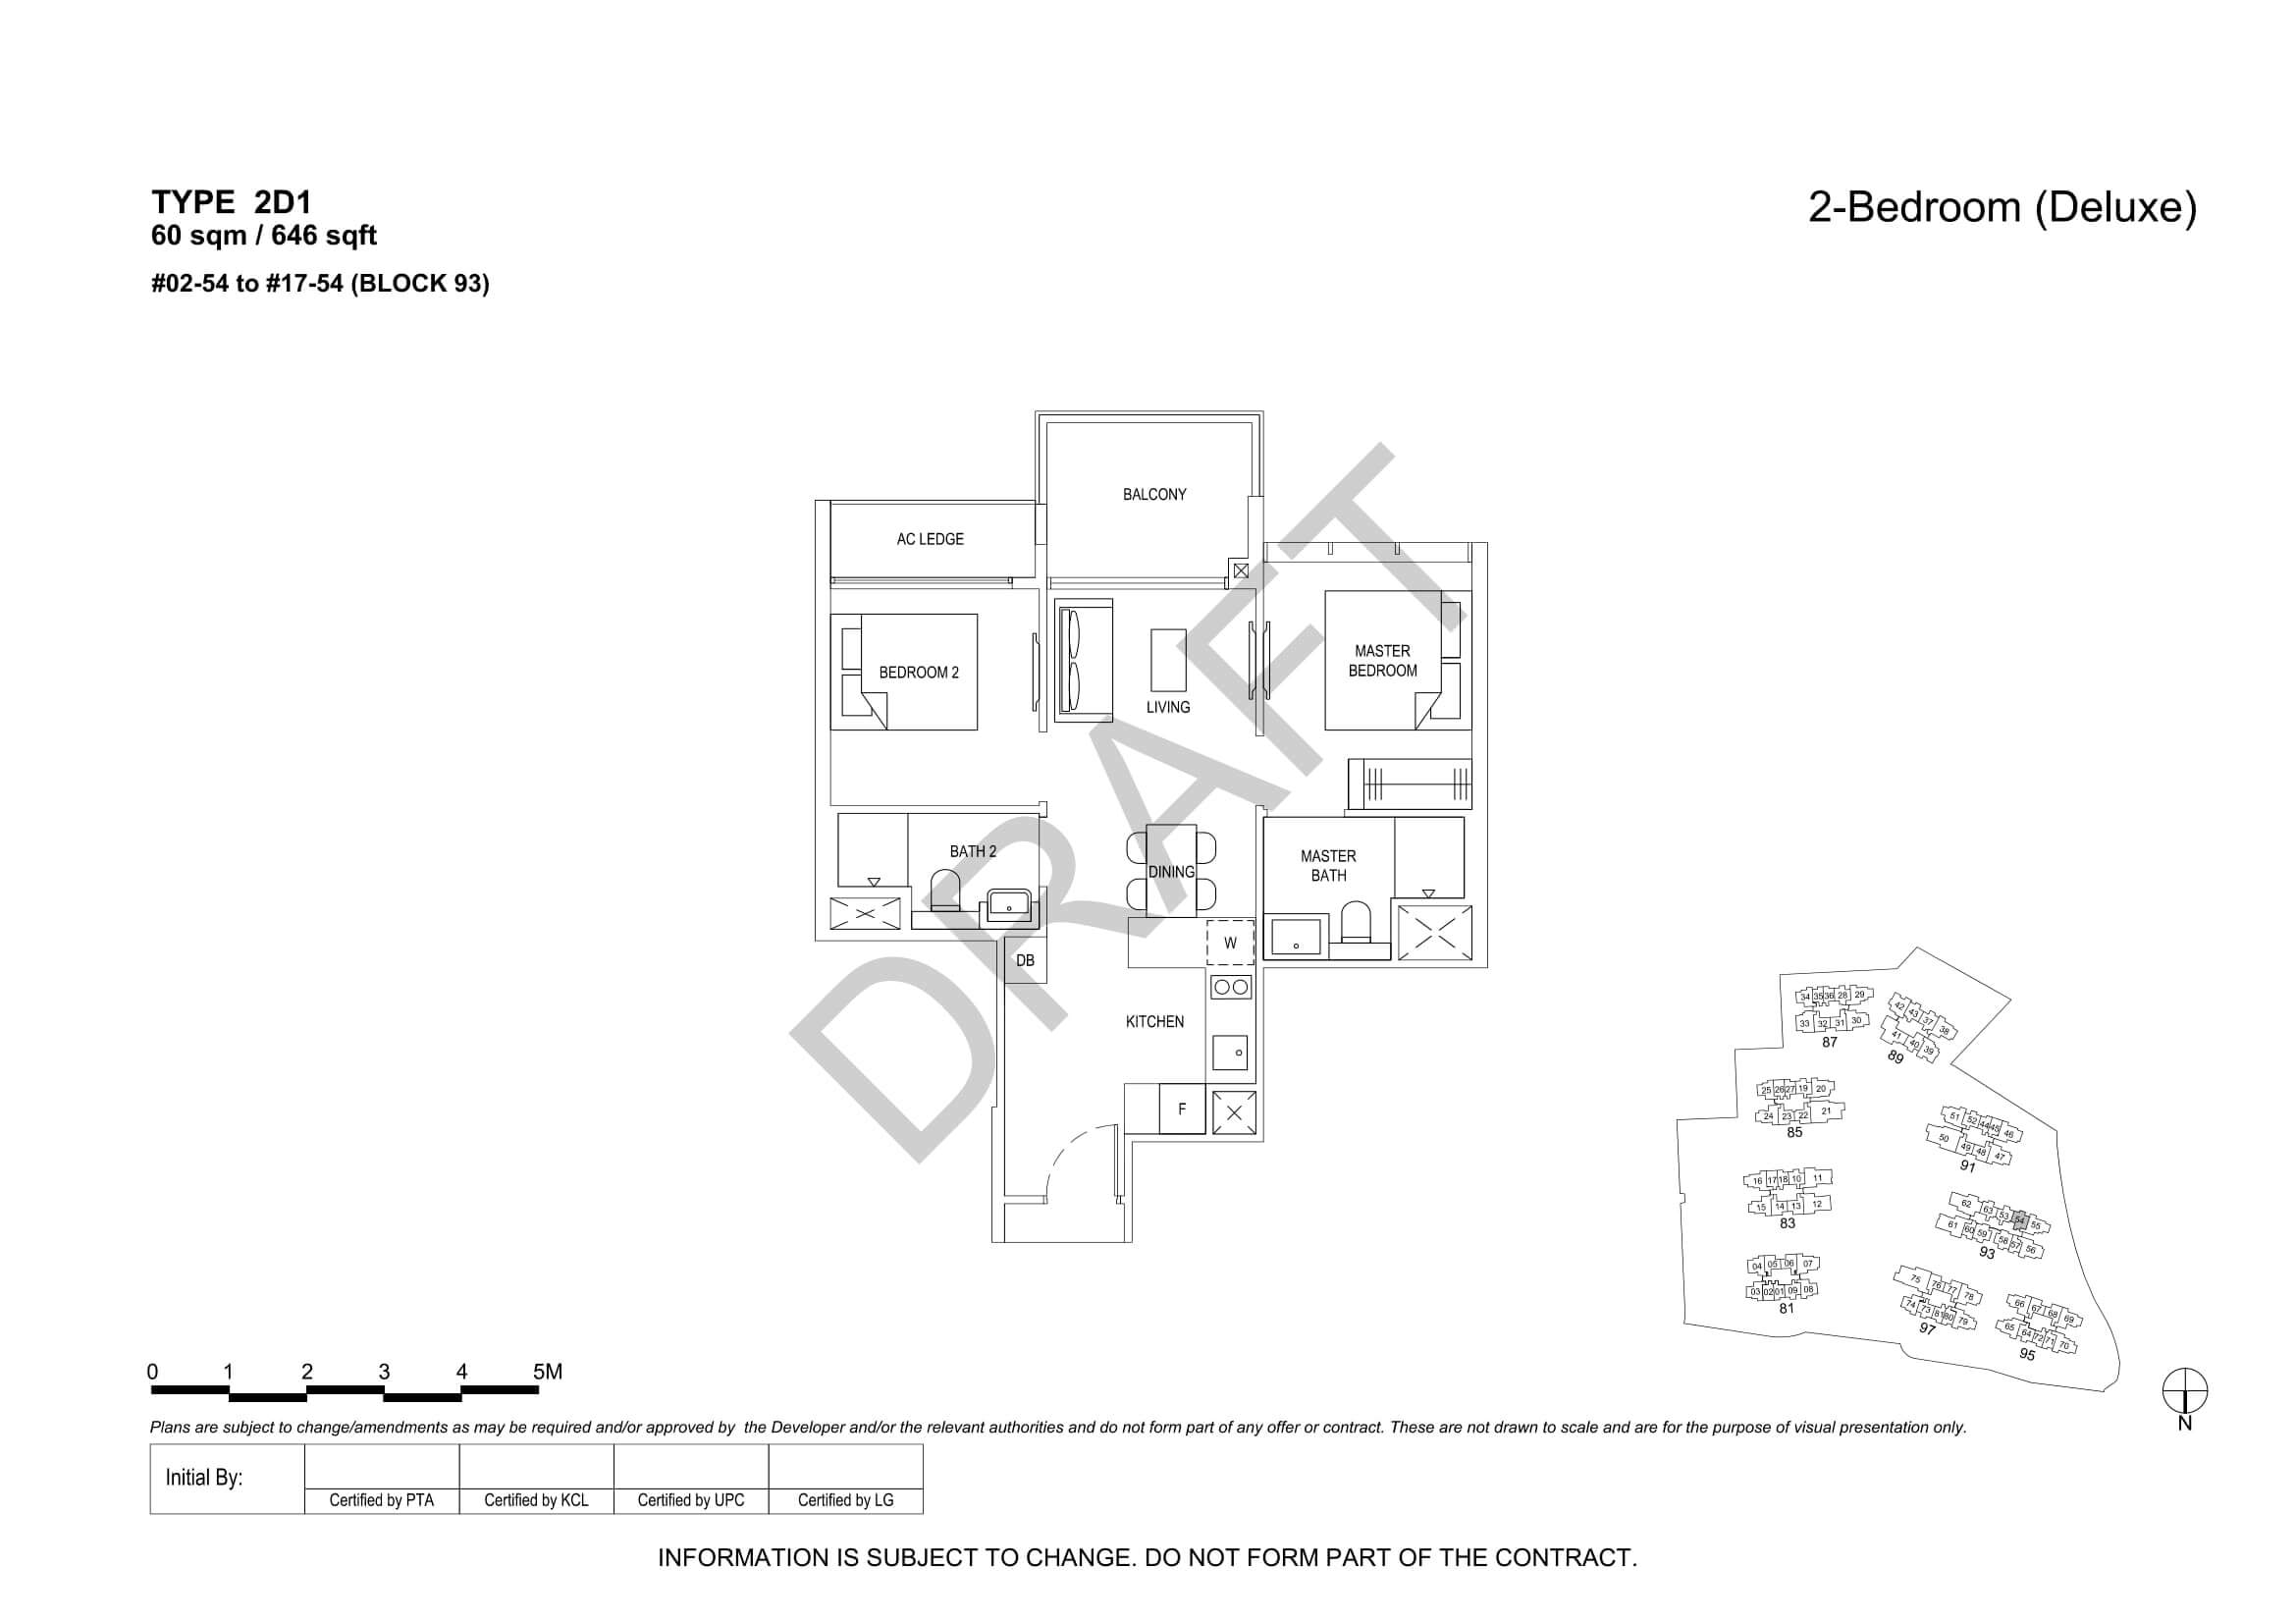 The Florence Residences Floor Plan 2-Bedroom Type 2D1